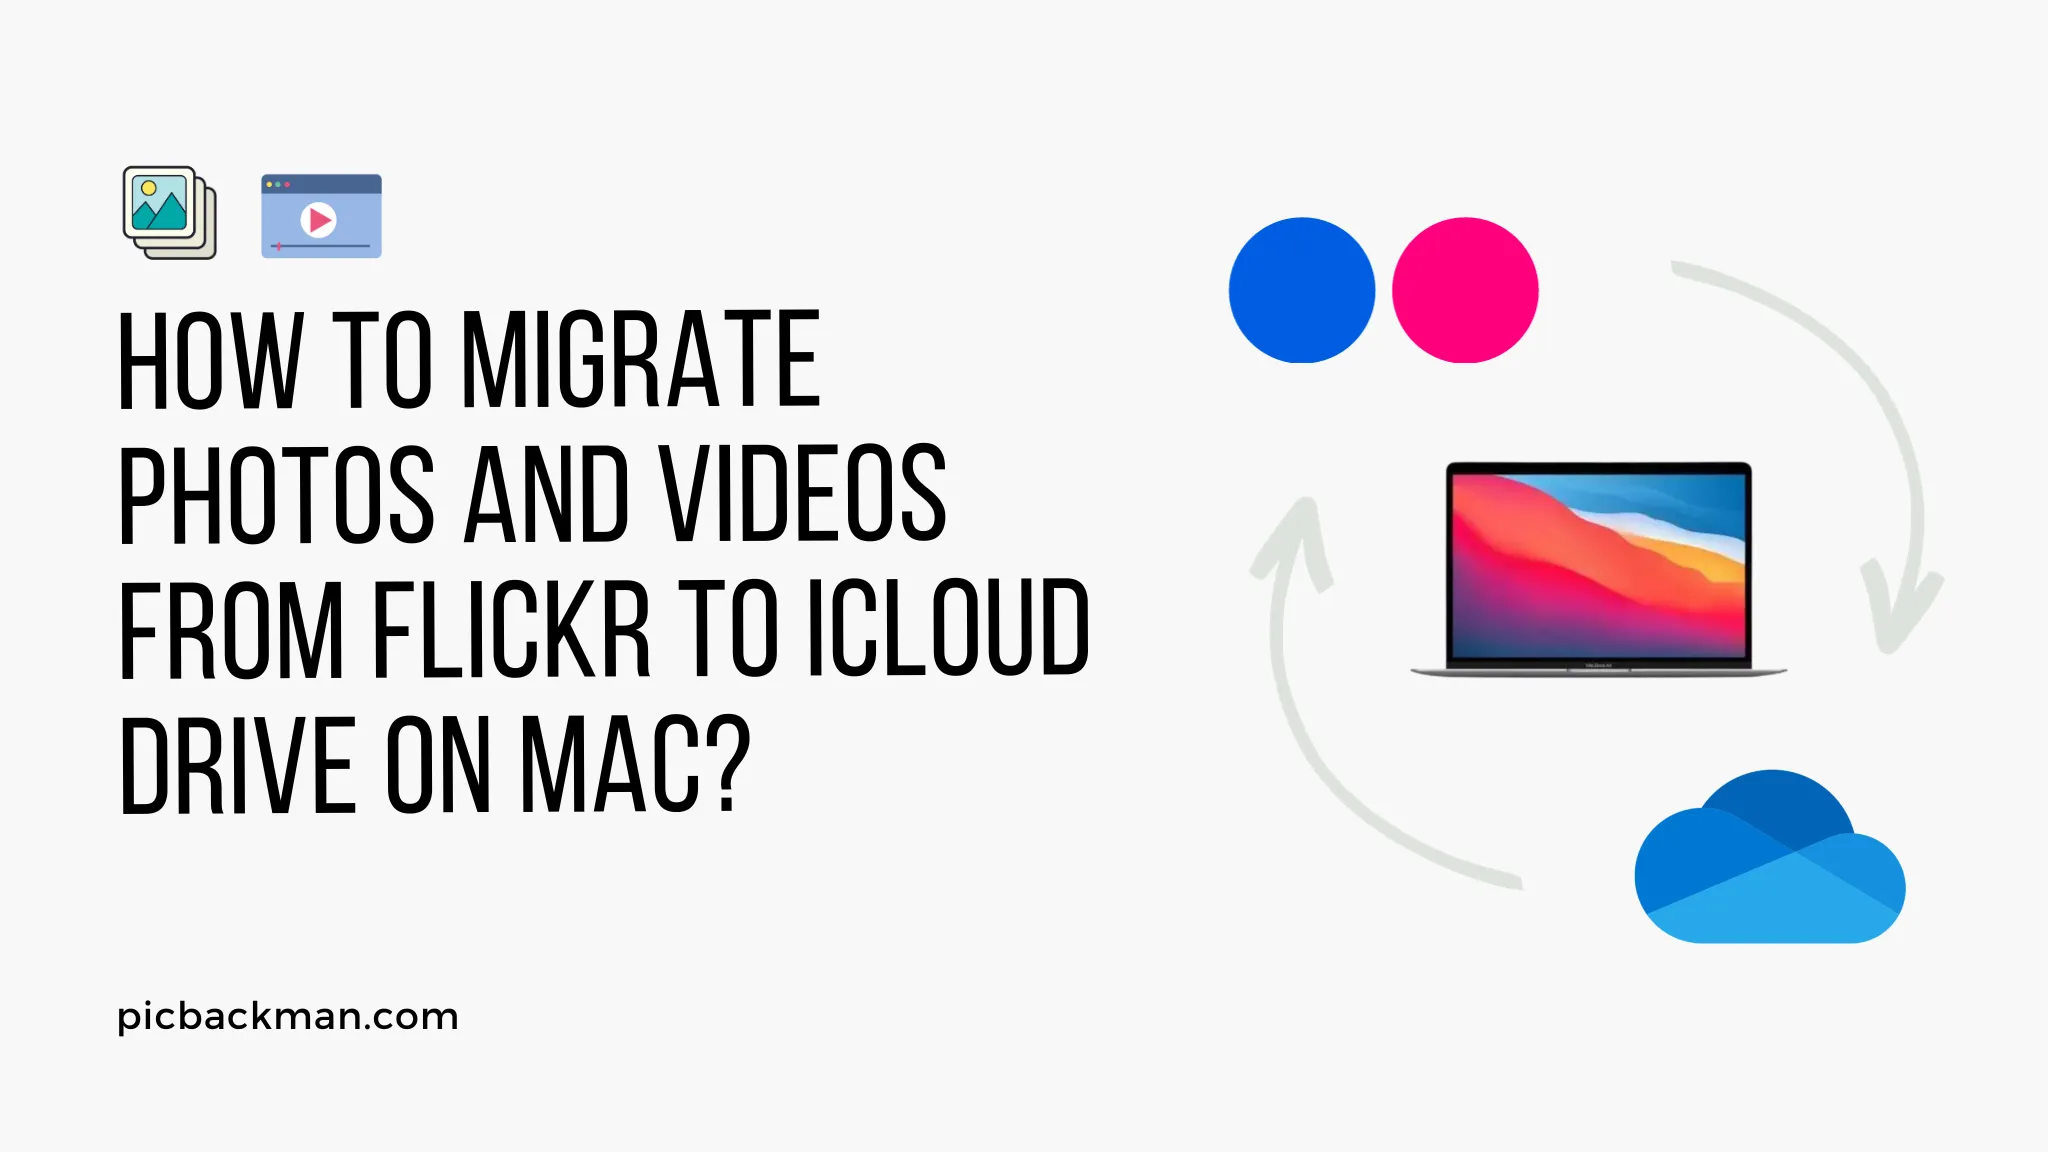 How to Migrate Photos and Videos from Flickr to iCloud Drive on Mac